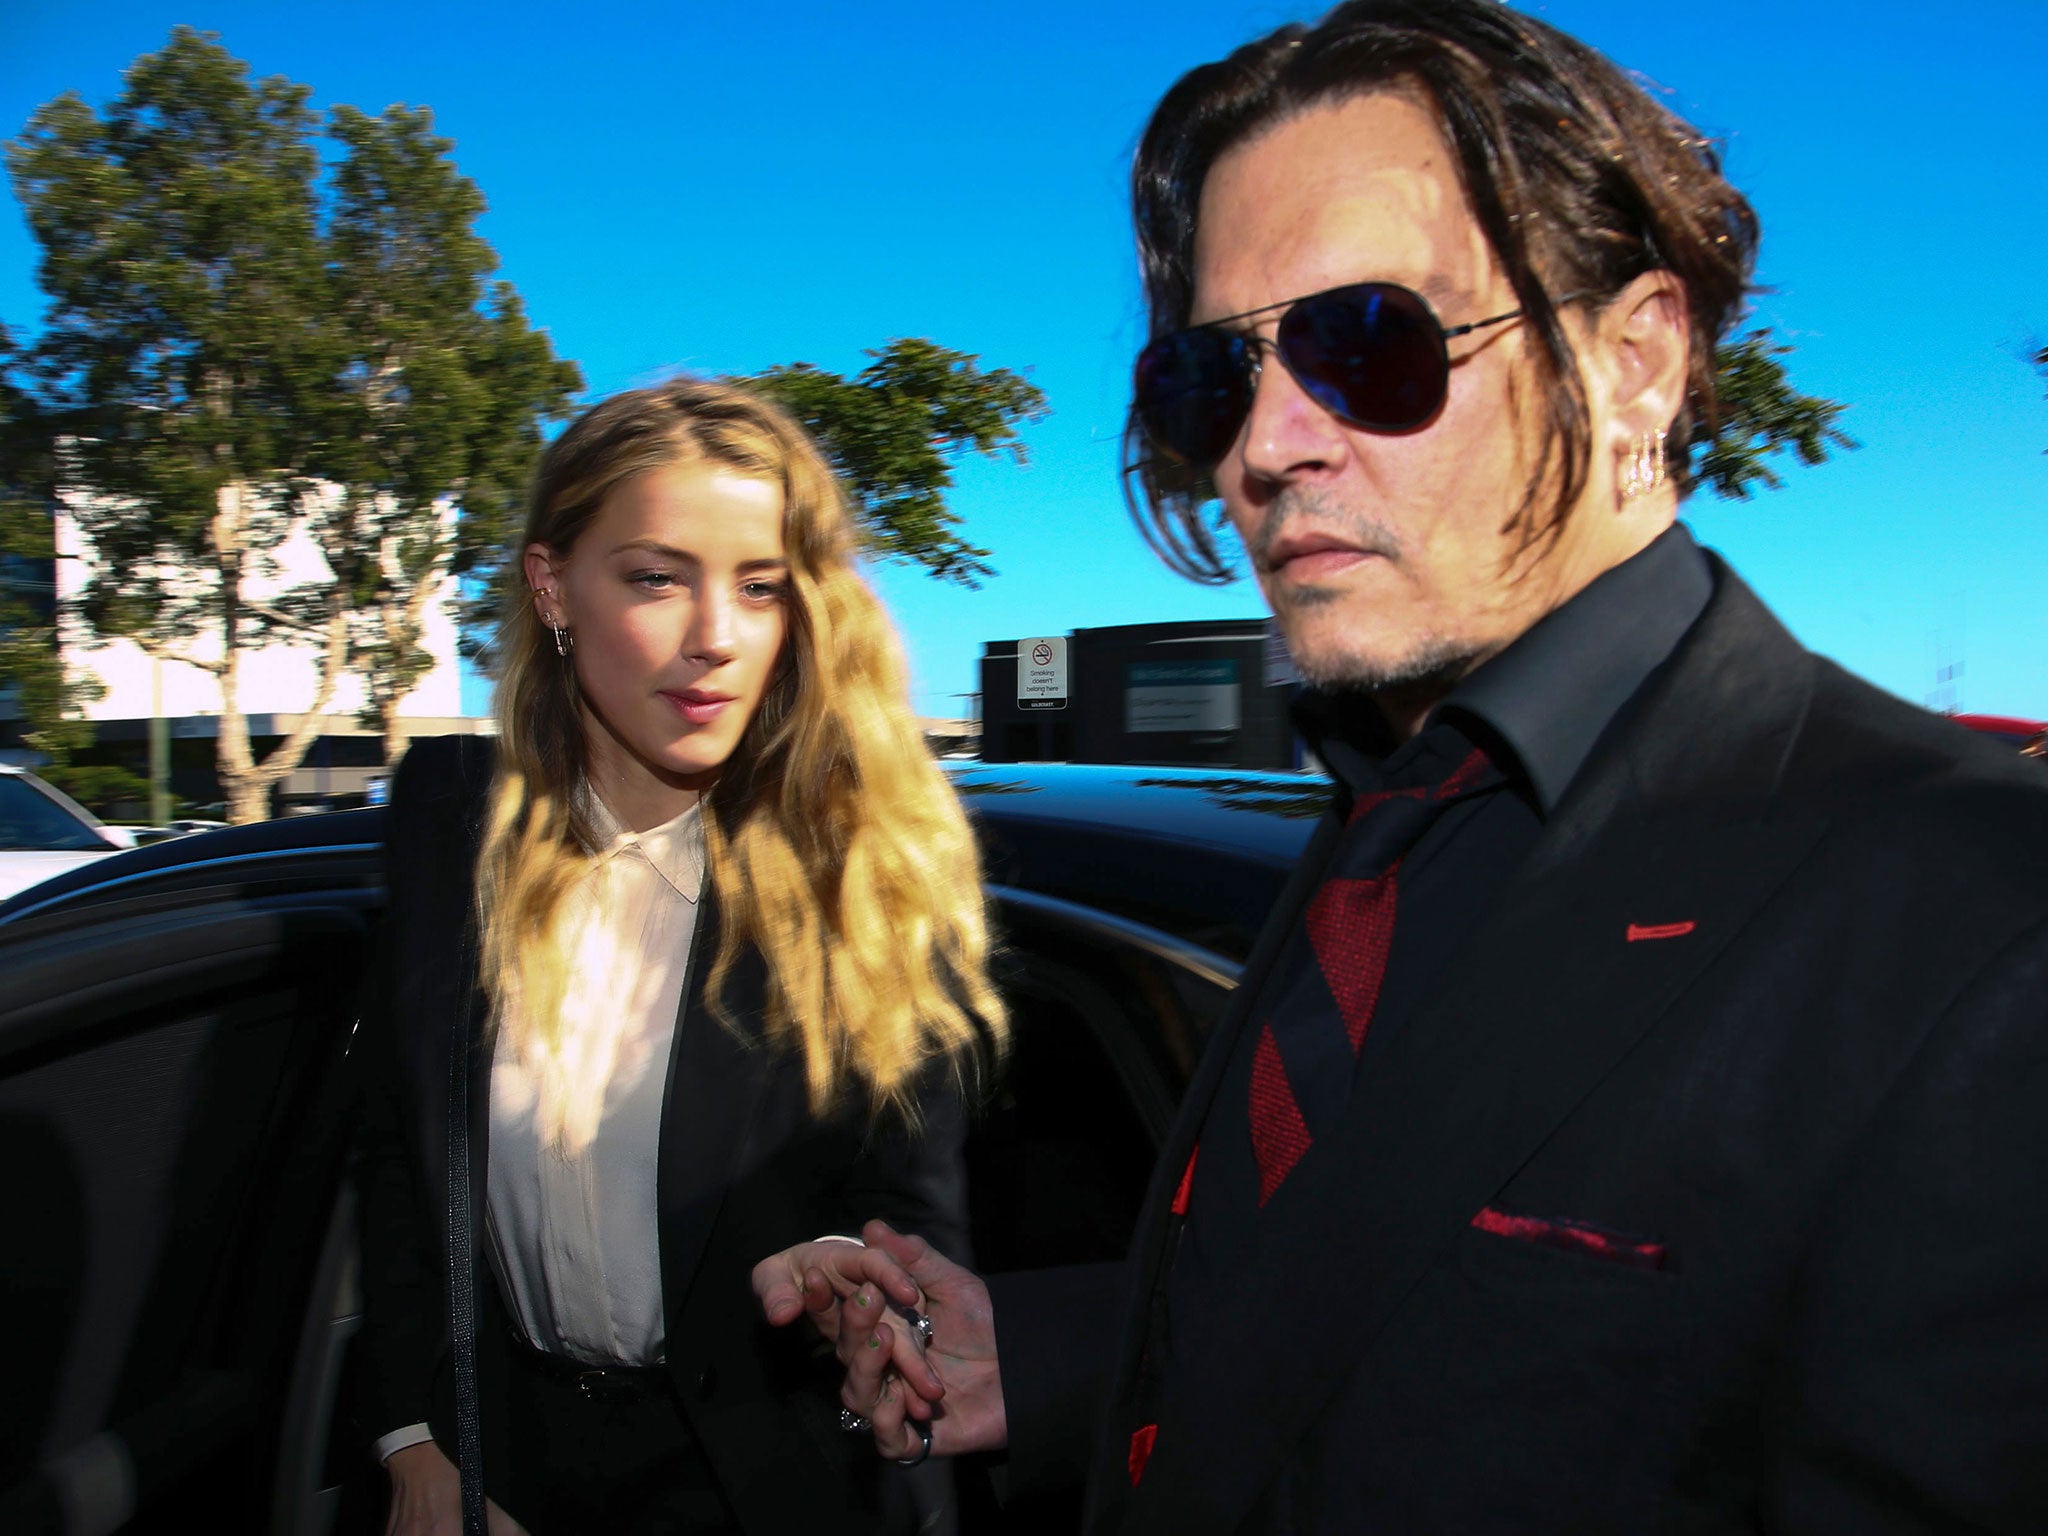 Amber Heard, Johnny Depp's wife, has filed for divorce citing irreconcilable differences after 15 months of marriage to the Hollywood star